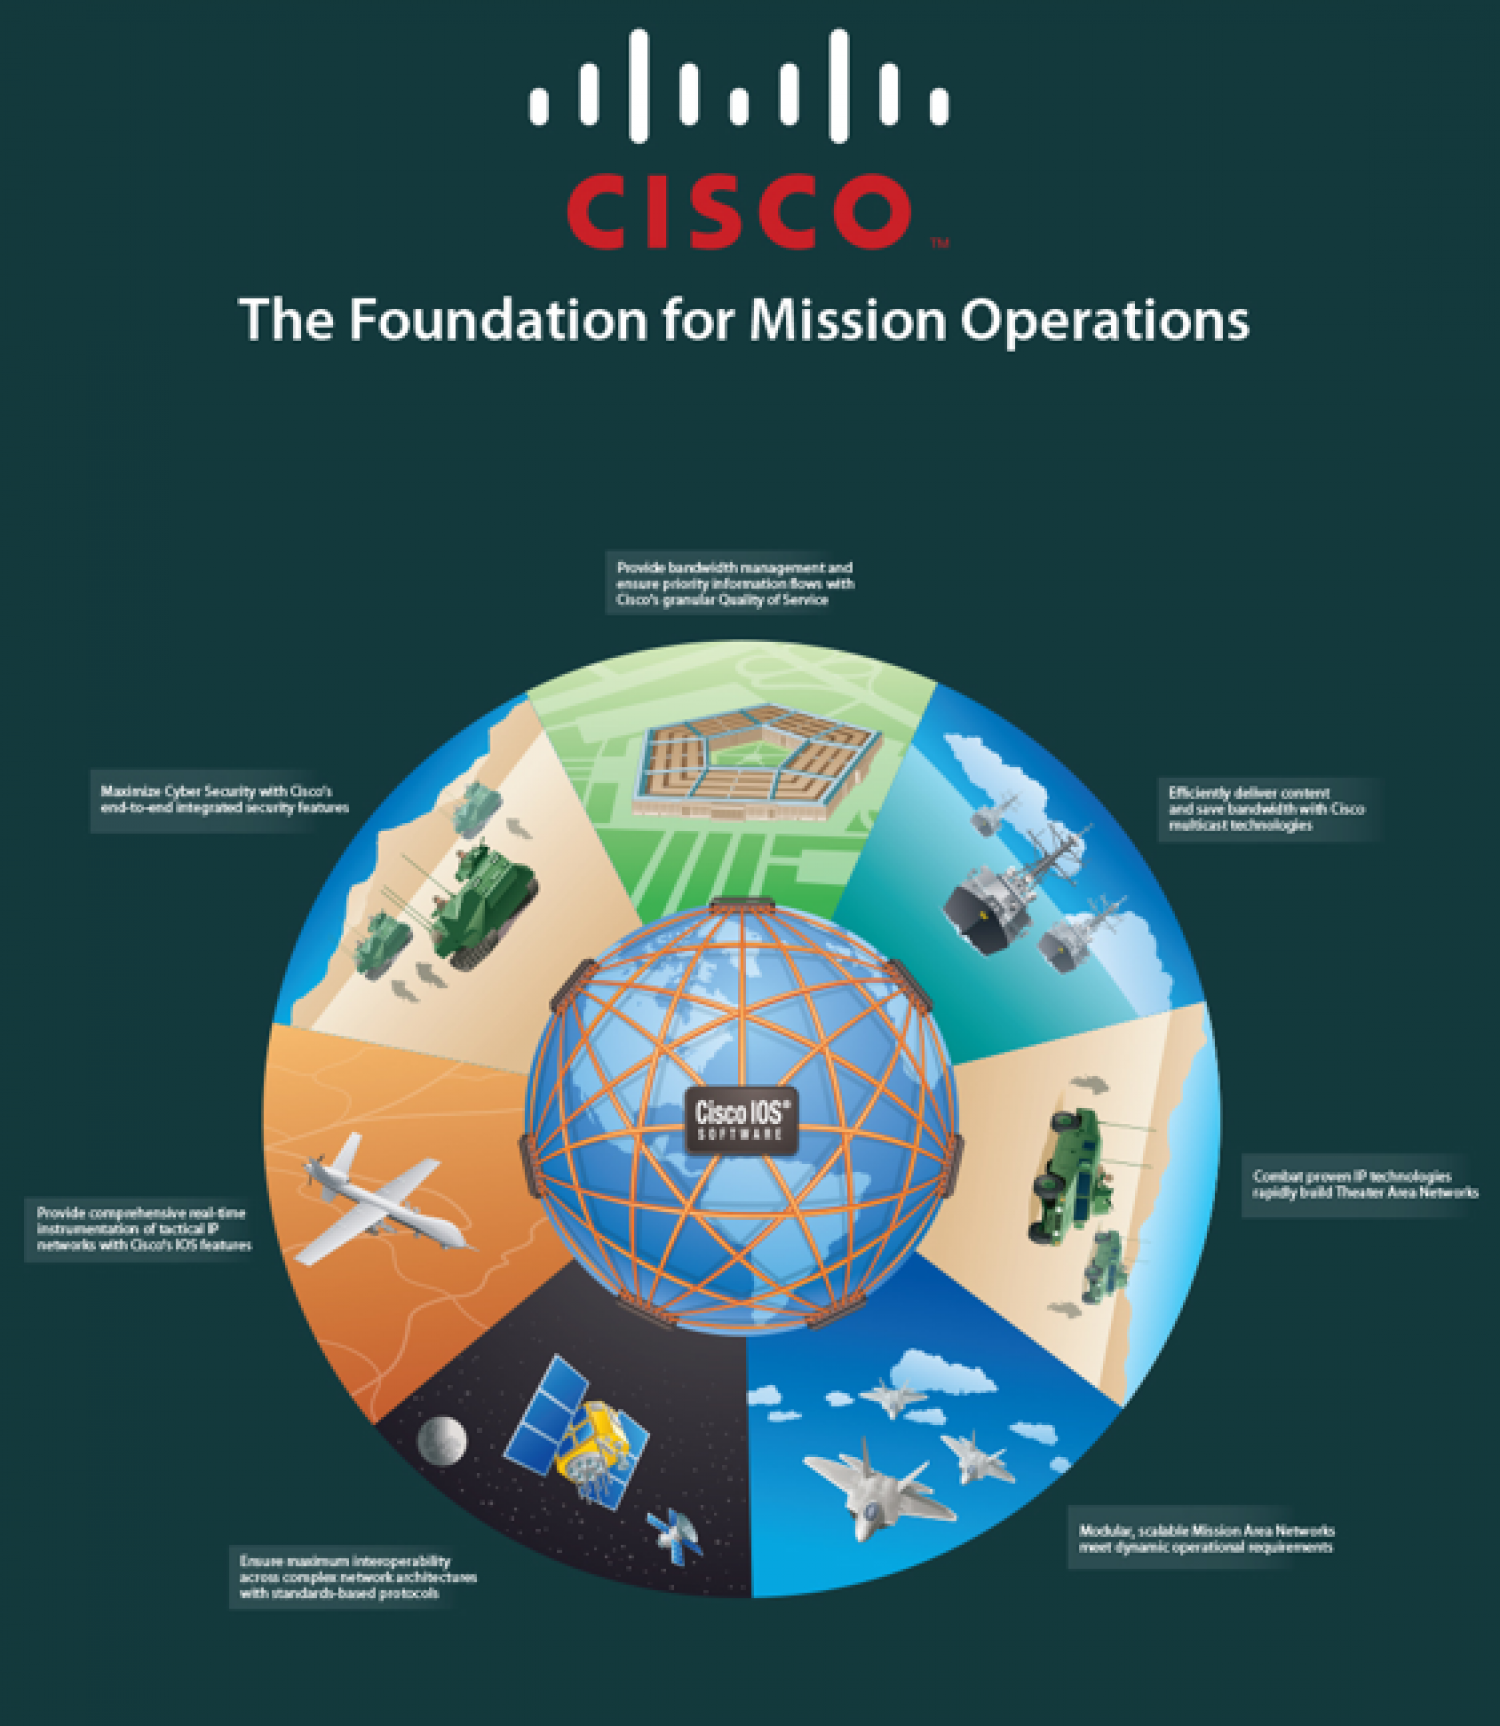 Cisco: The Foundation for Mission Operations Infographic